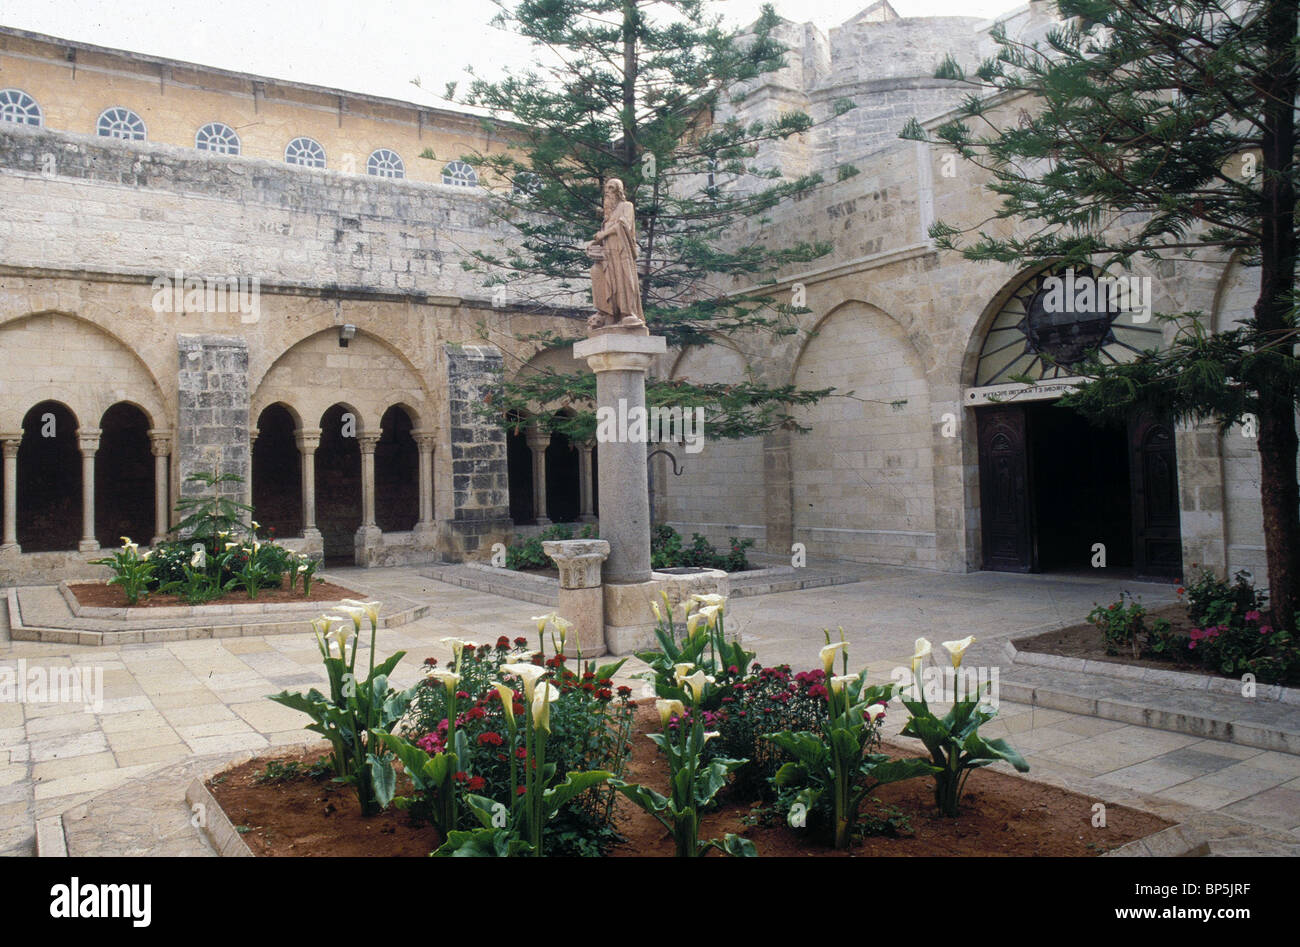 4243. CHURCH OF NATIVITY, THE COURTYARD IN FRON OF THE MONASTERY AND THE CHURCH OF ST. CATHERINE Stock Photo